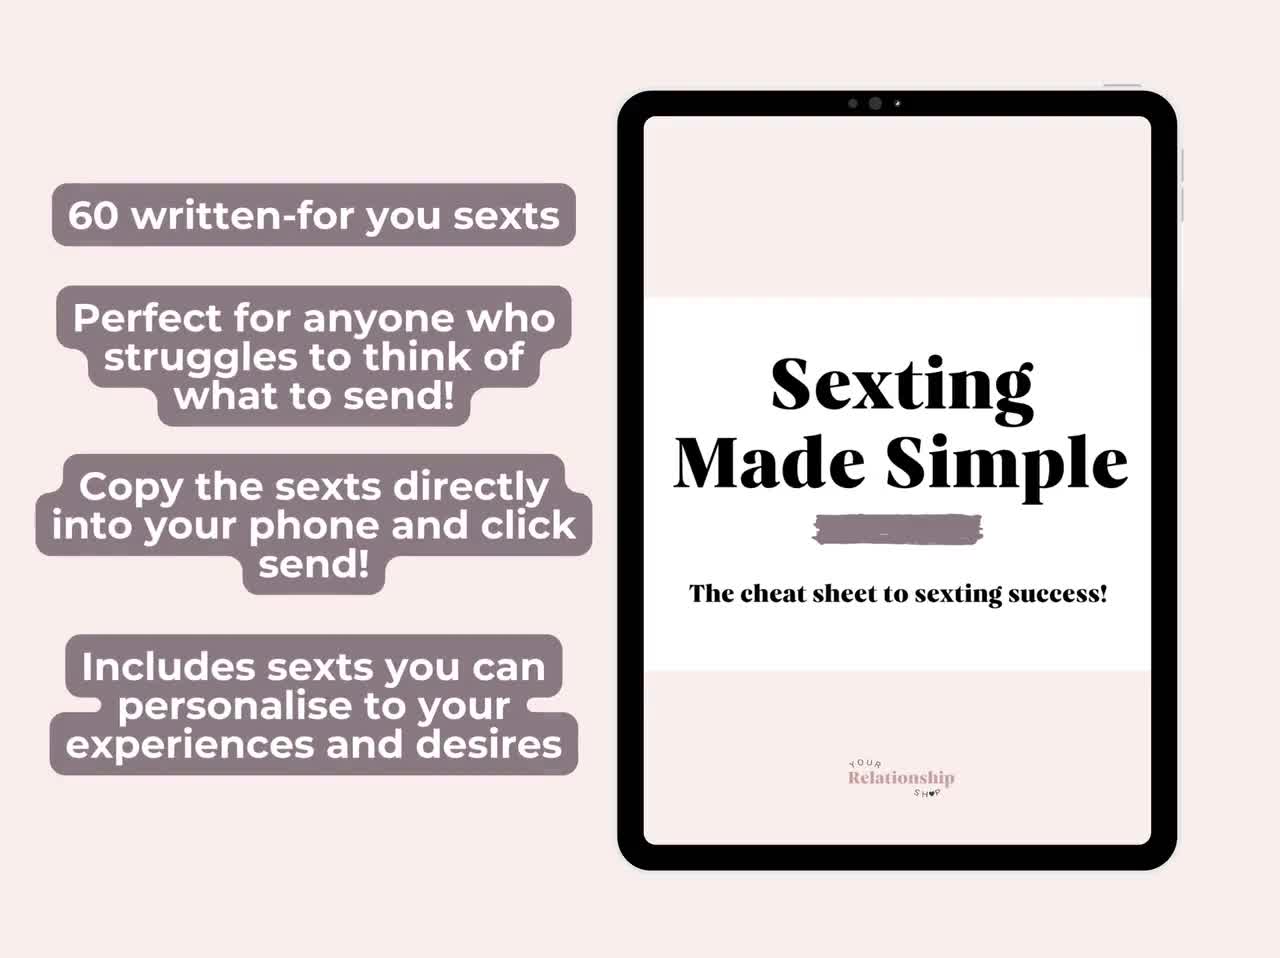 60 Ready To Send Sexts: Intimate Relationships, Relationship Workbook,  Couples Activities, Sex Therapy, Sex Journal, Intimacy Exercises - Etsy